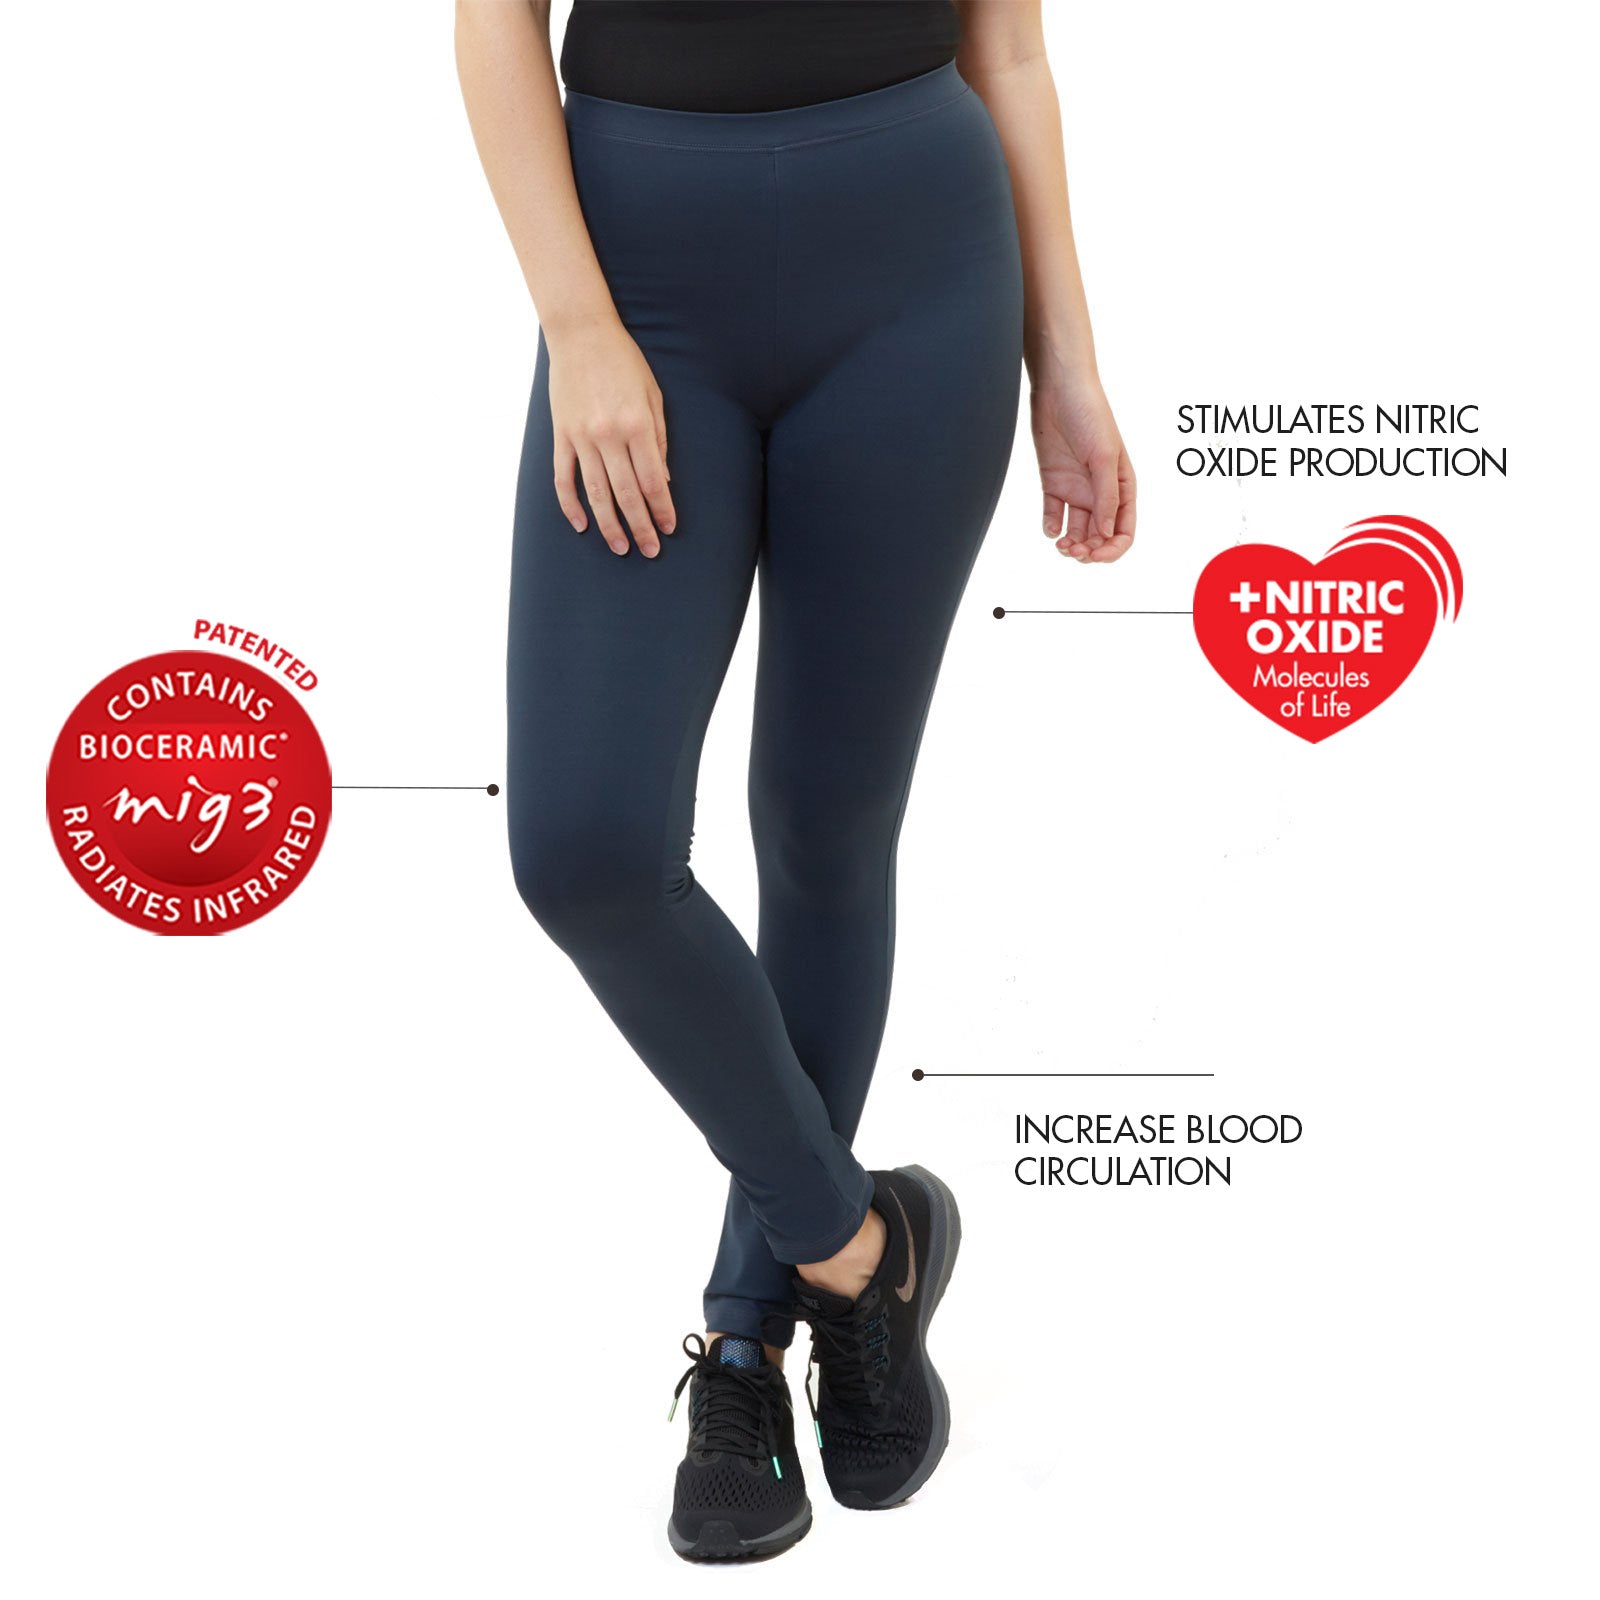 609Y - INNERGY Anticellulite Leggings with infrared (FIR) Slimming